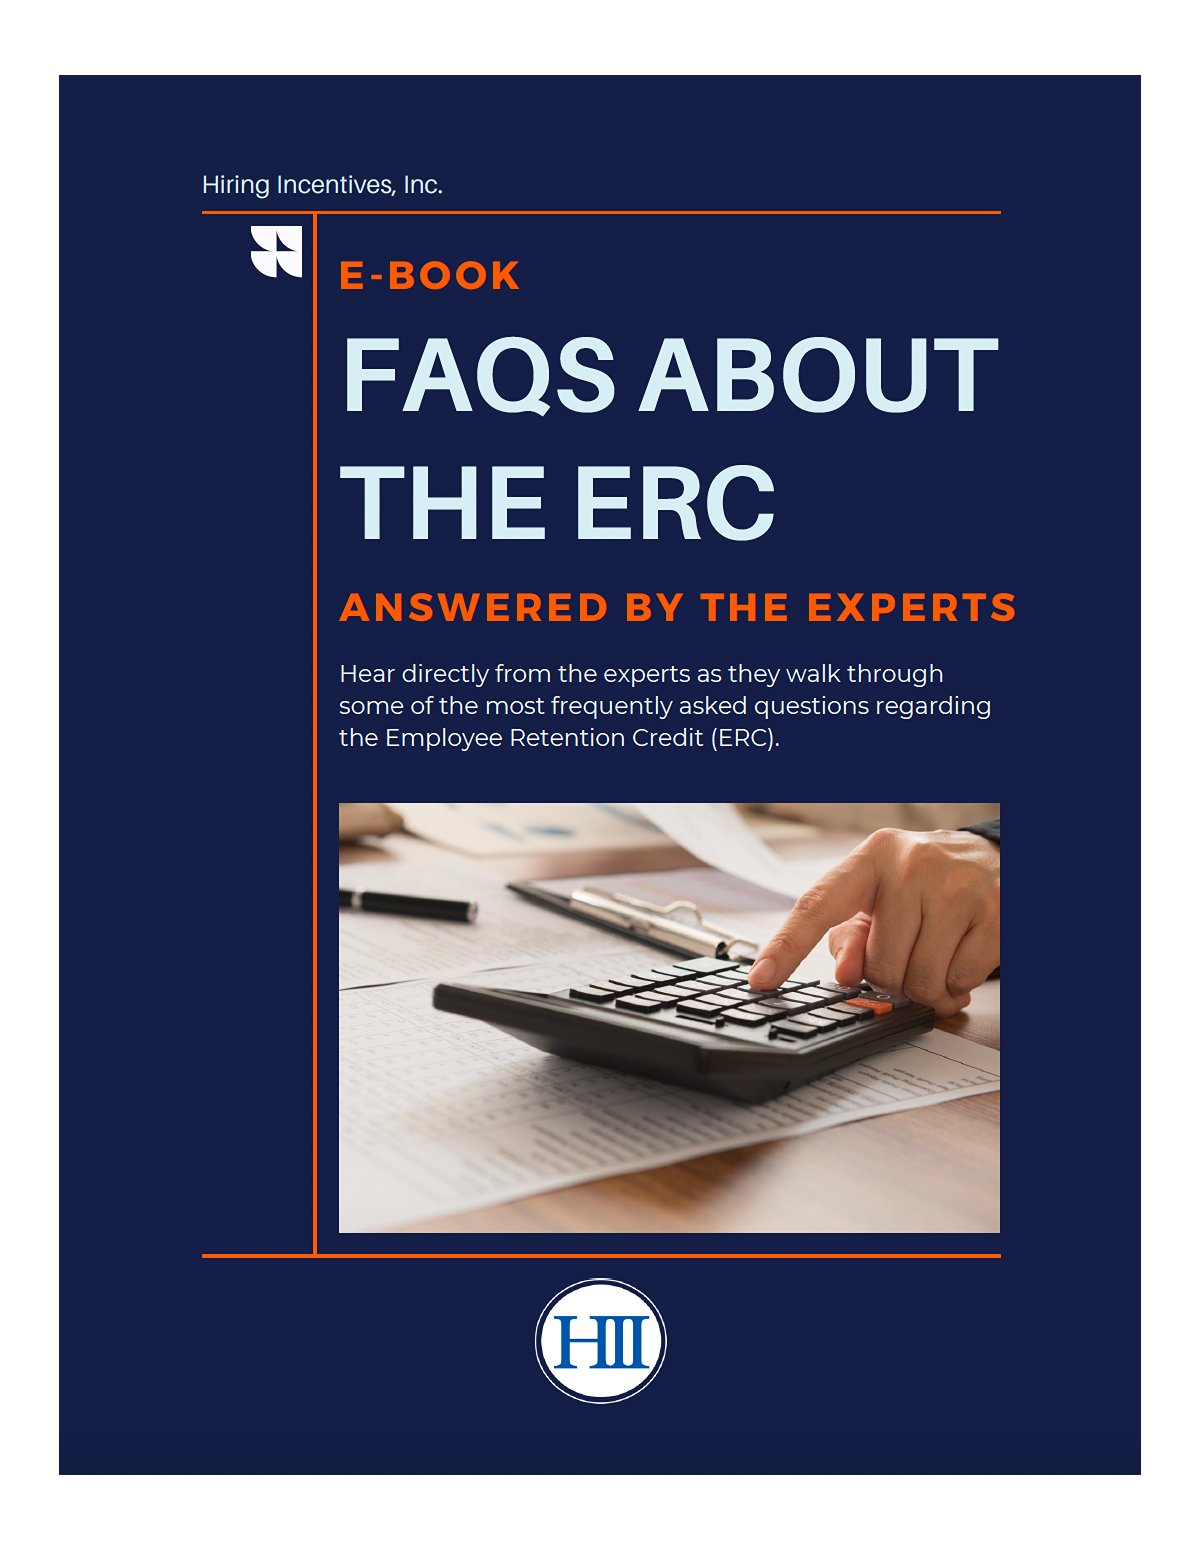 FAQs About The ERC: Answered by the Experts